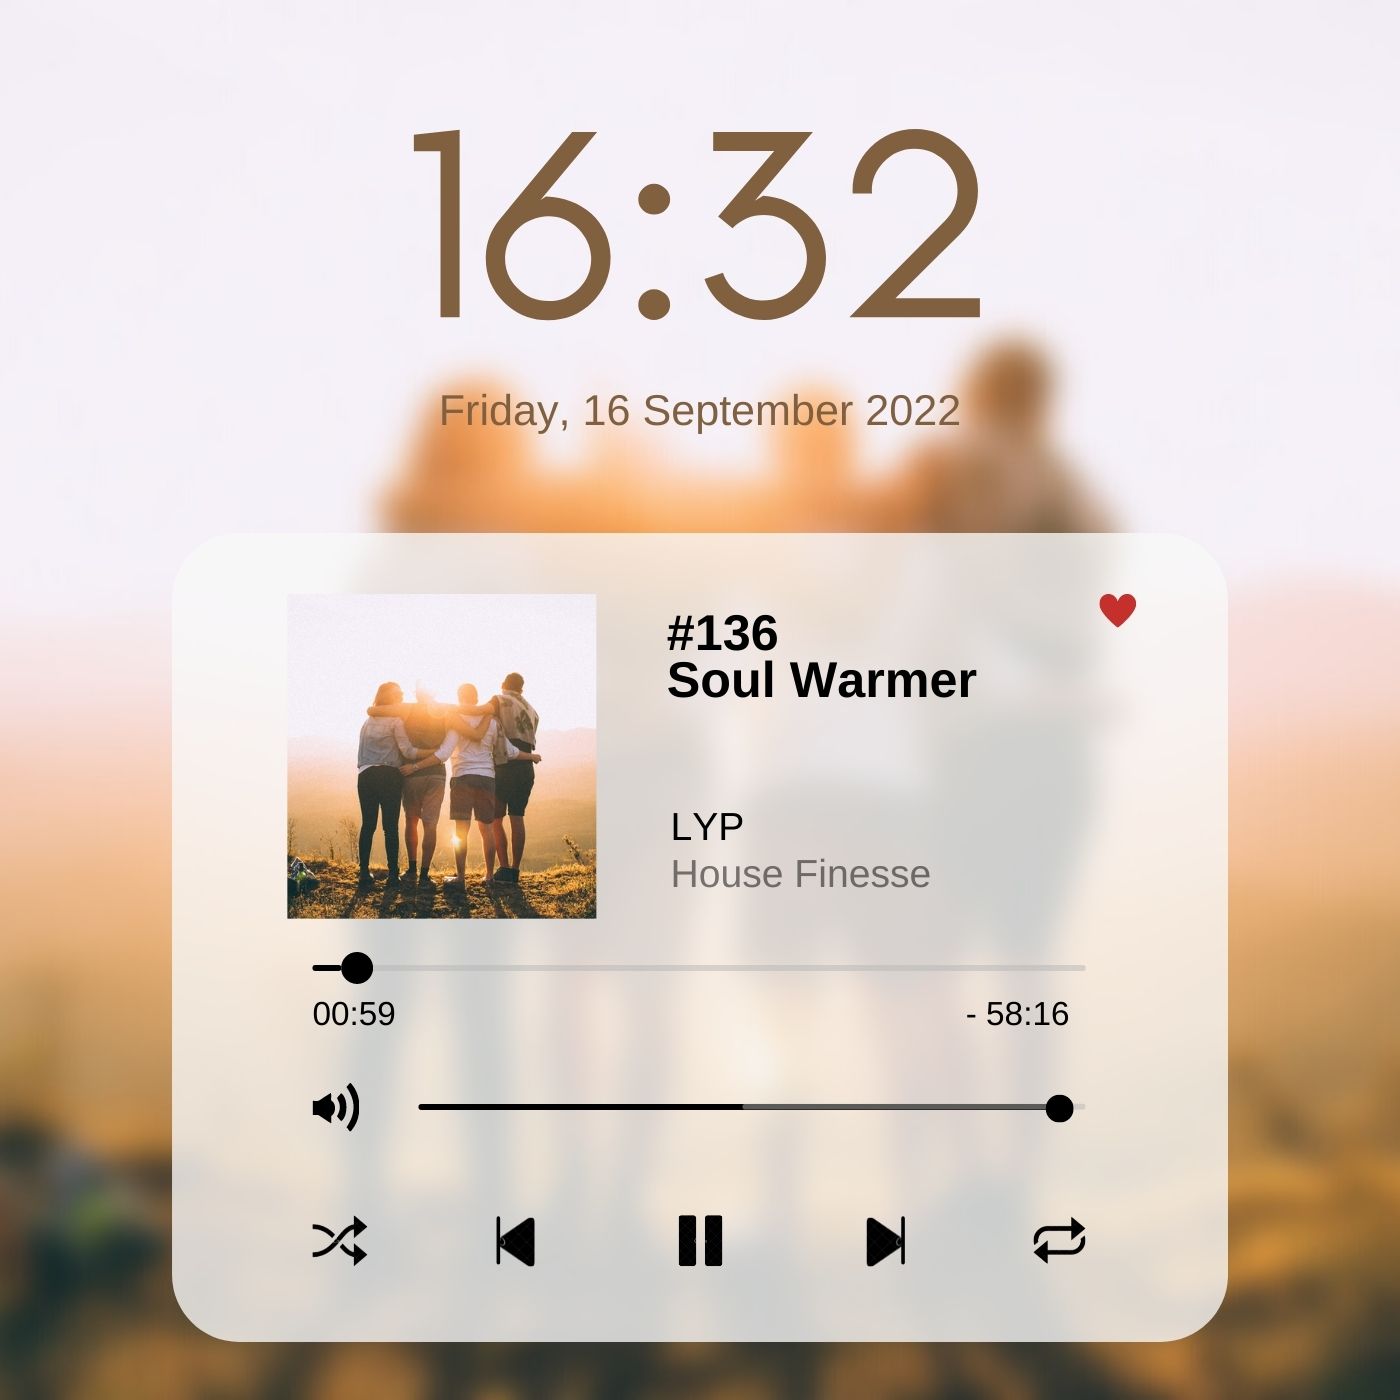 Soul Warmer with LYP